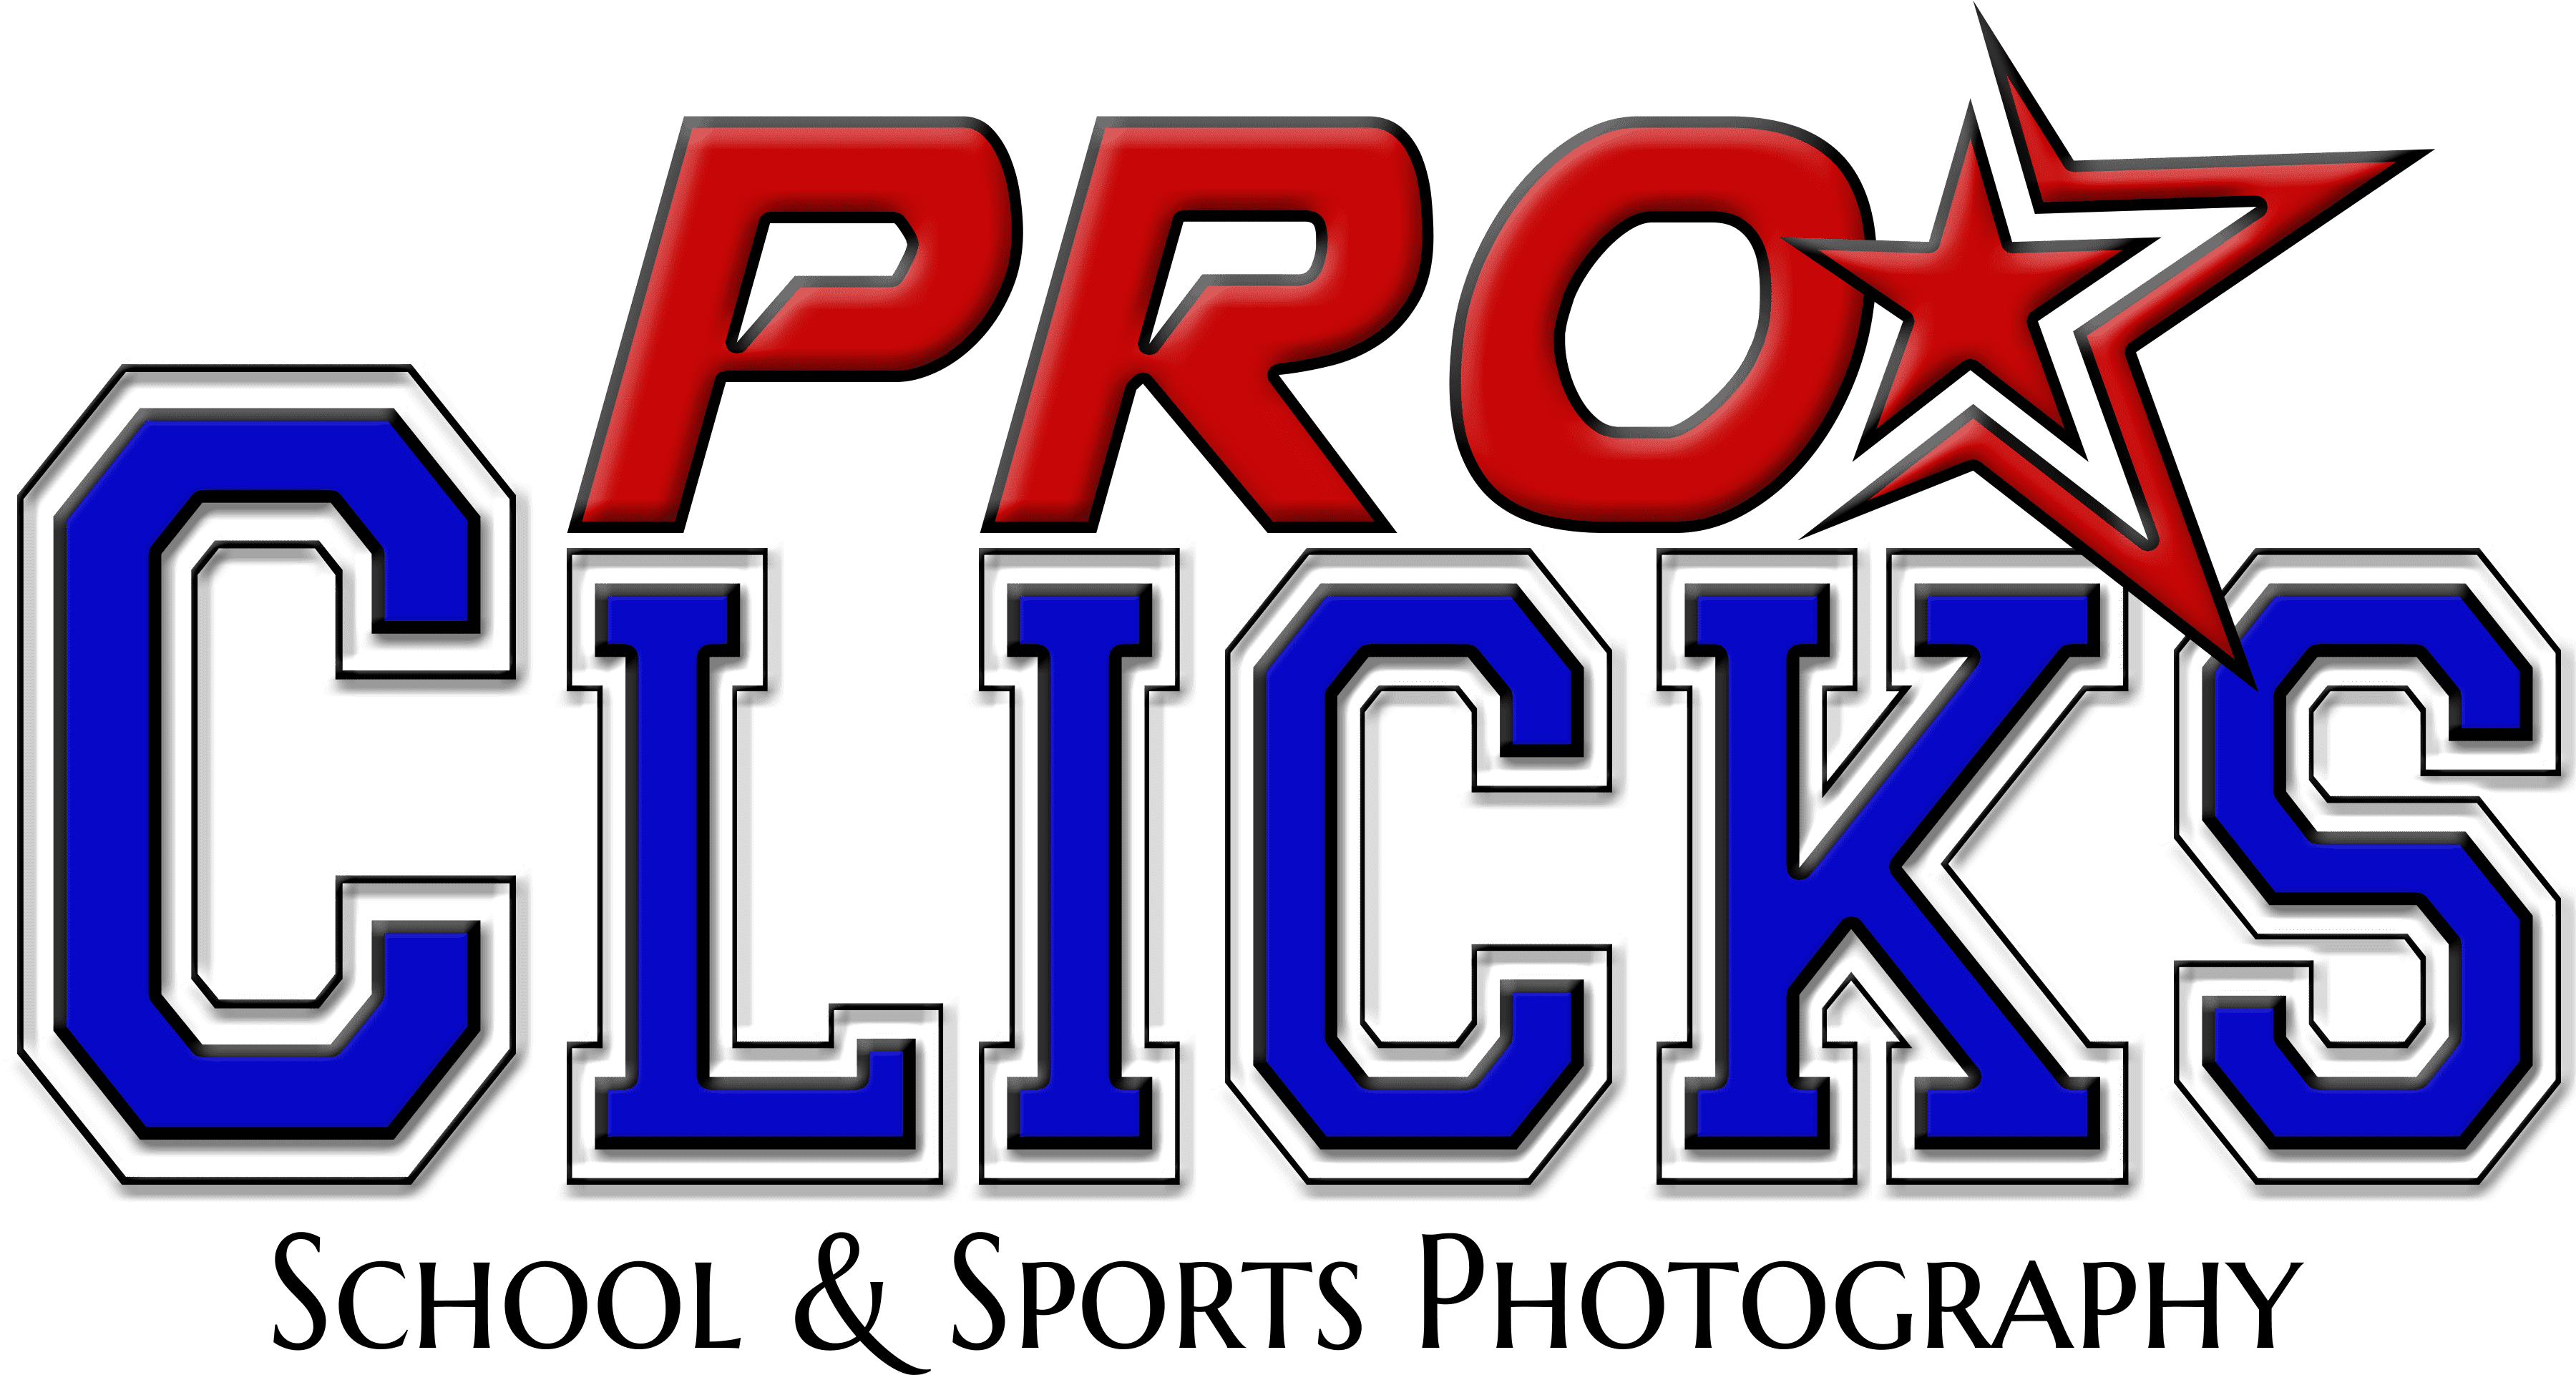 ProClick is a premier school and sports photography studio serving the major citys and communities of Texas.